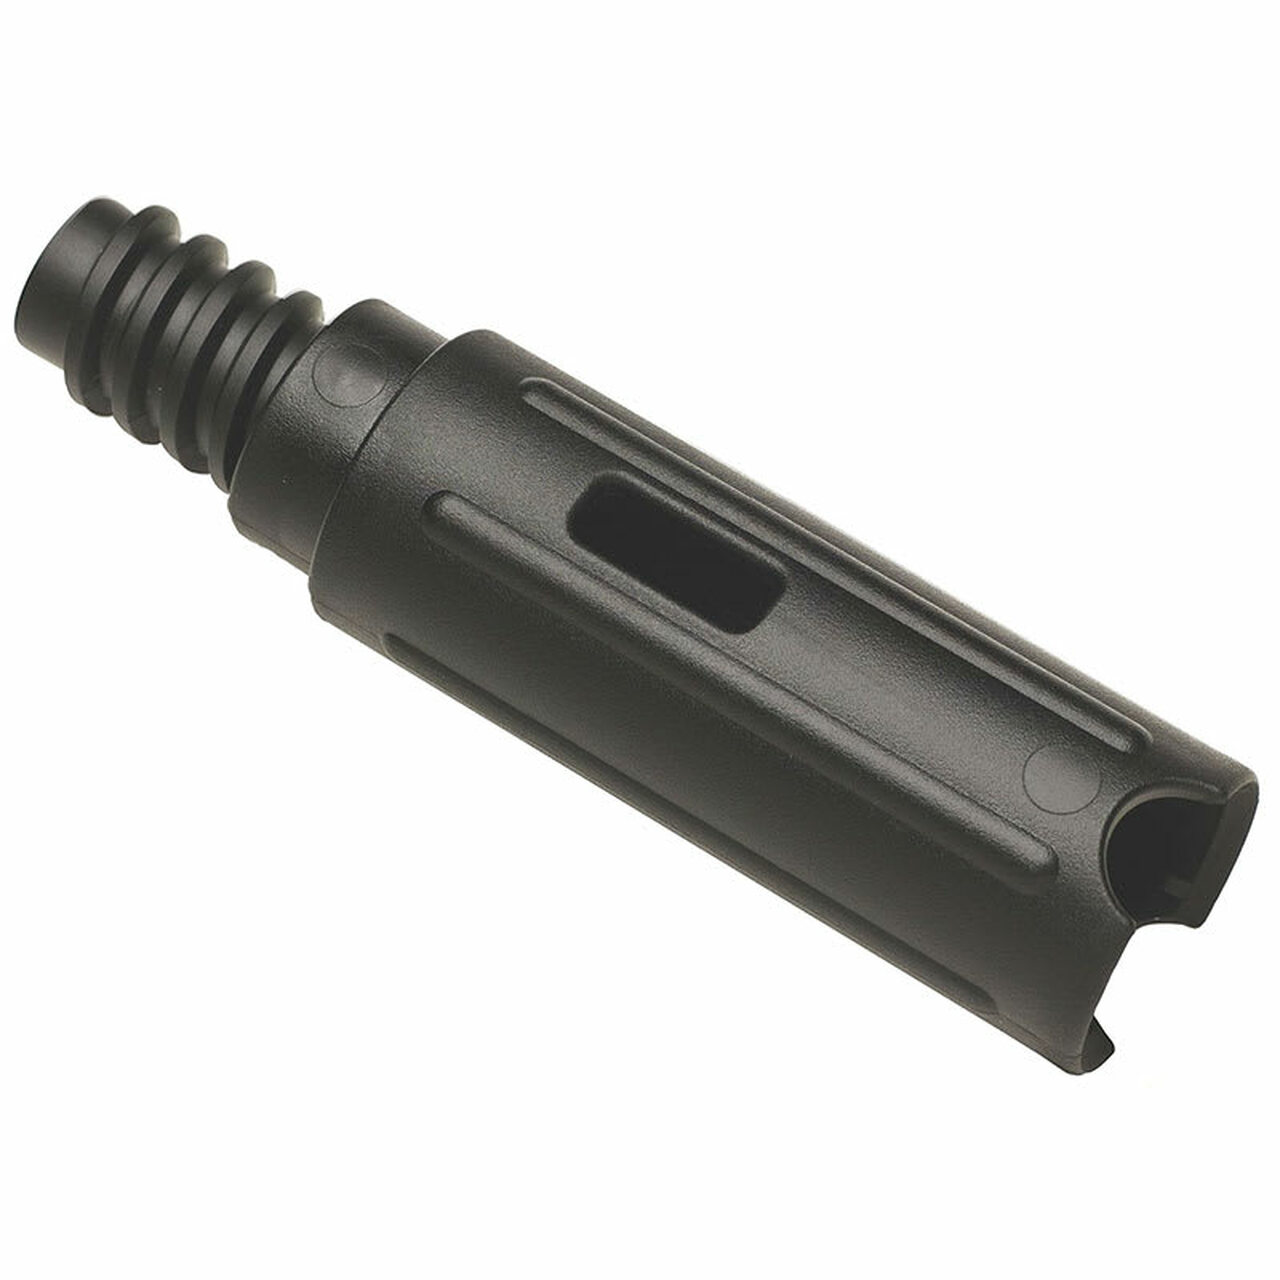 Rubbermaid Acme to Quick Connect Adapter